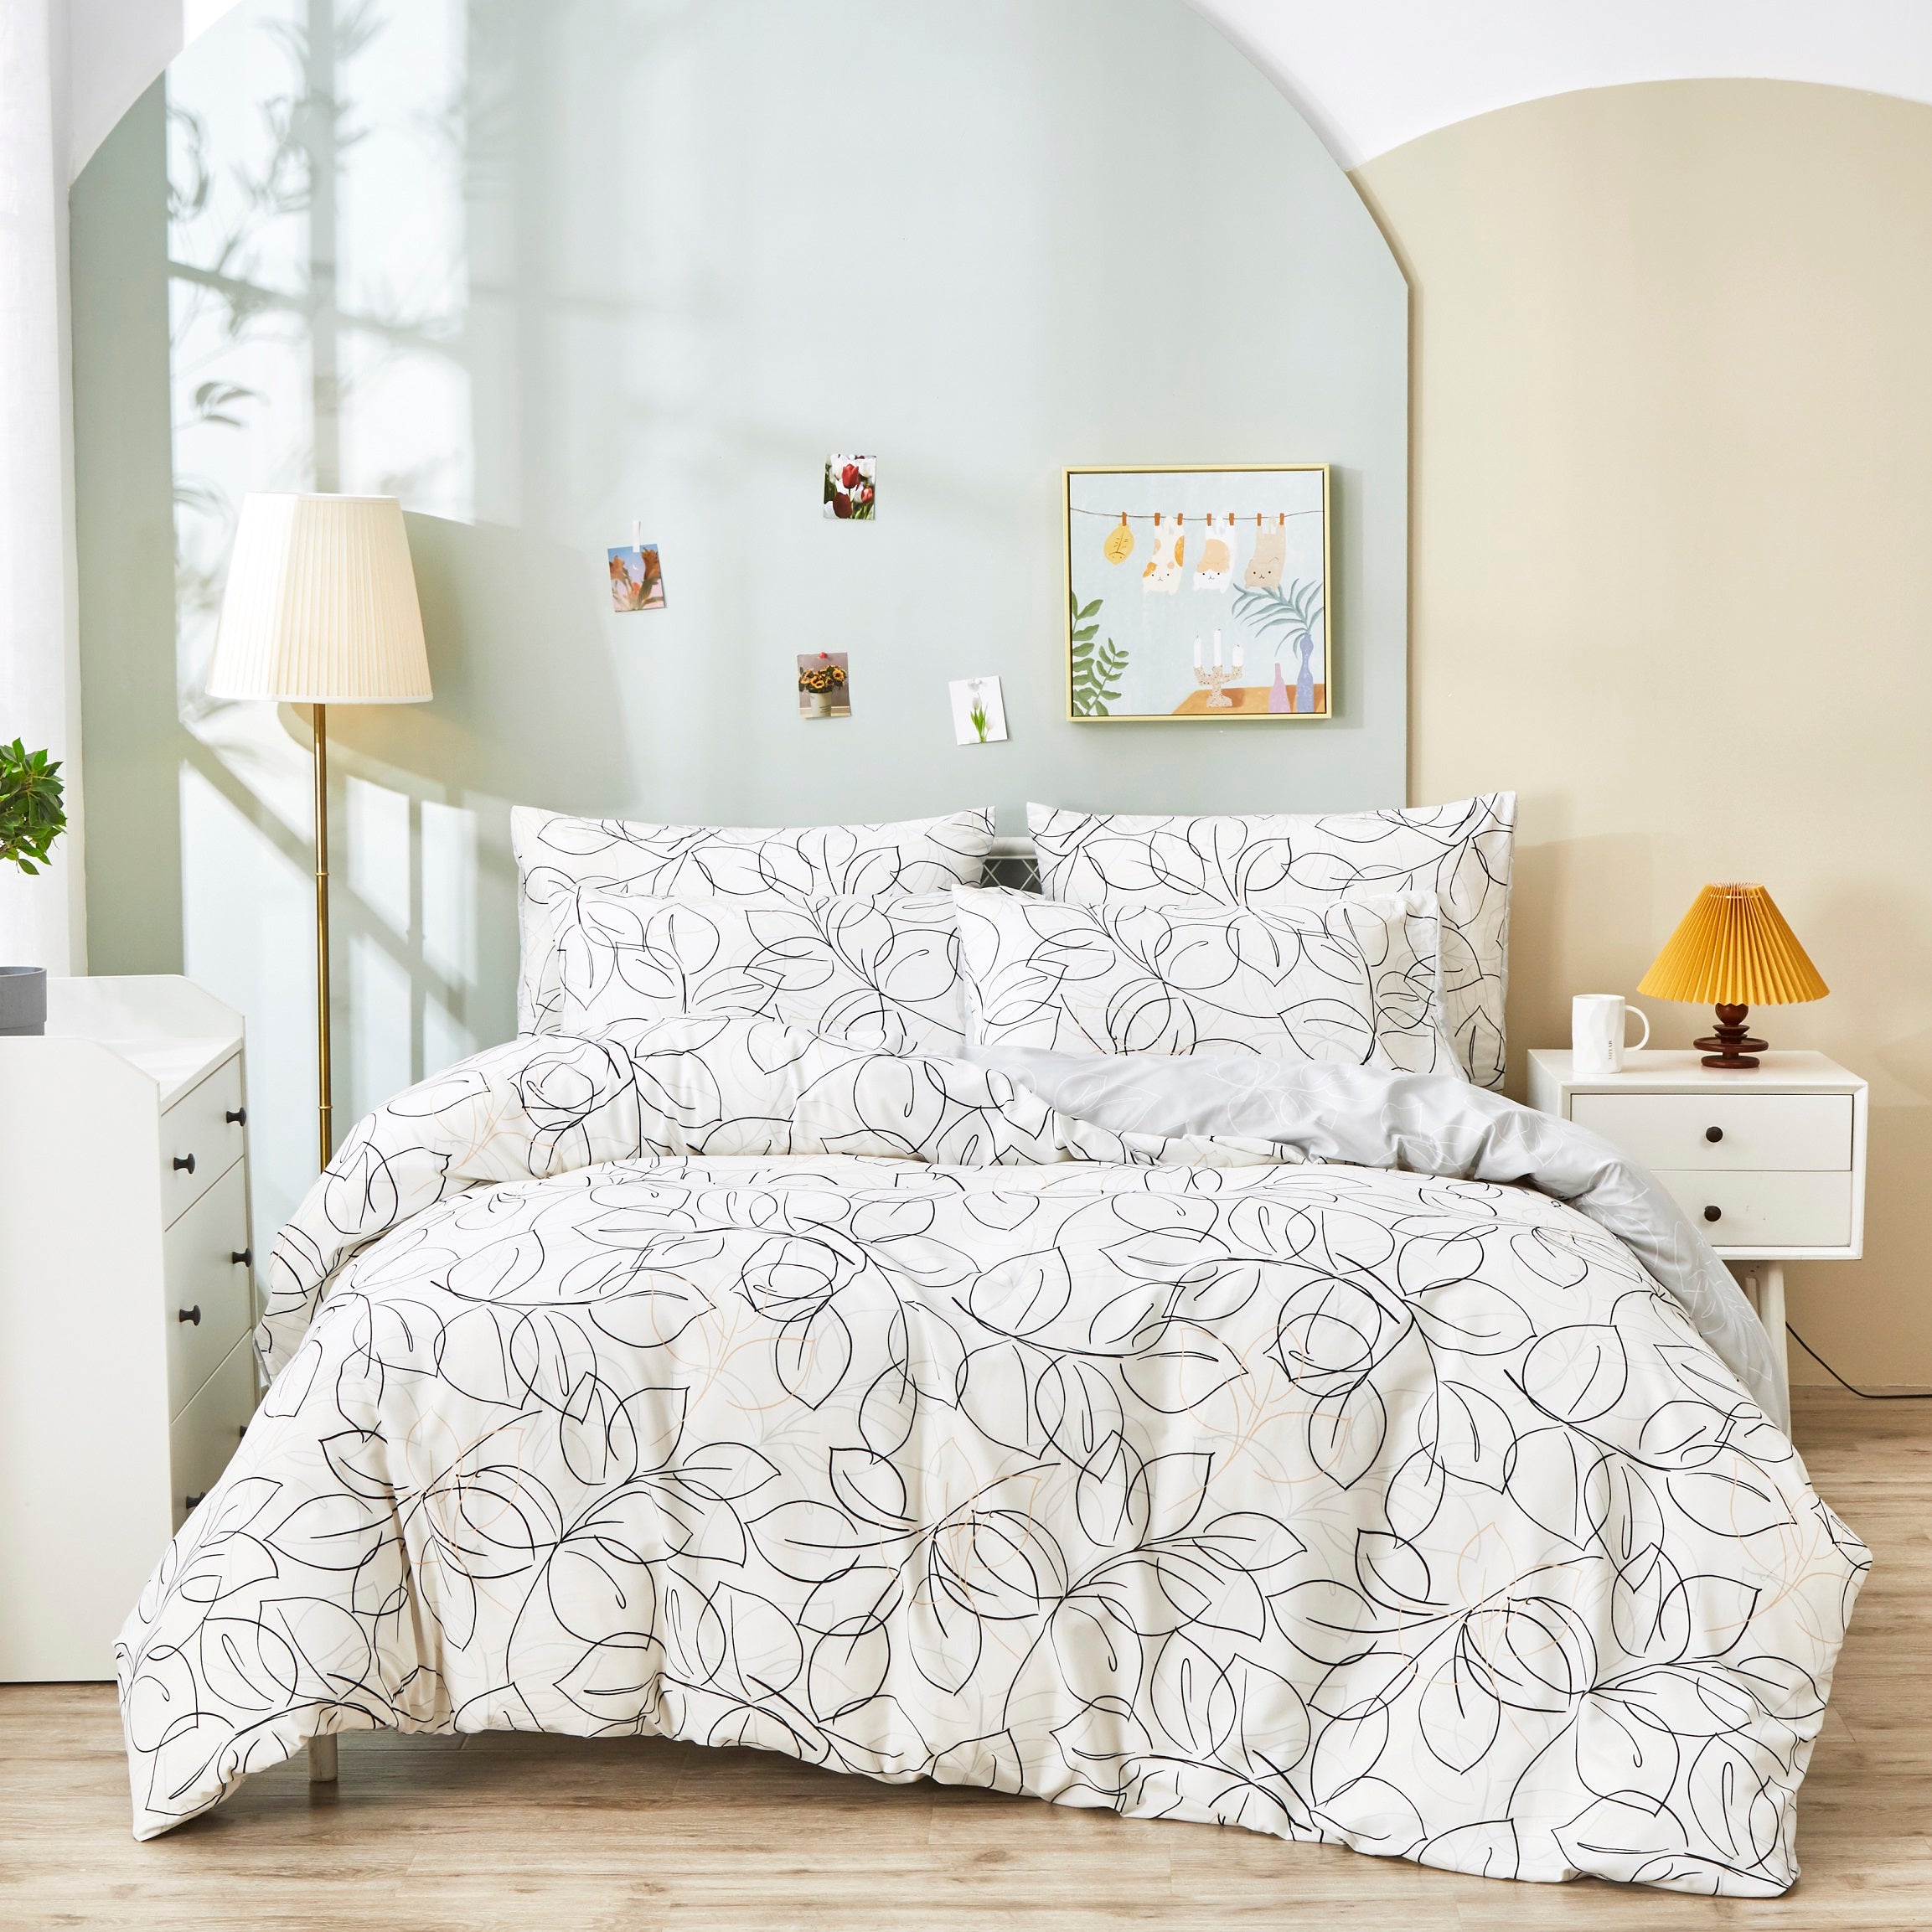 modern white leaf line art duvet cover on bed. click to view all duvet covers.